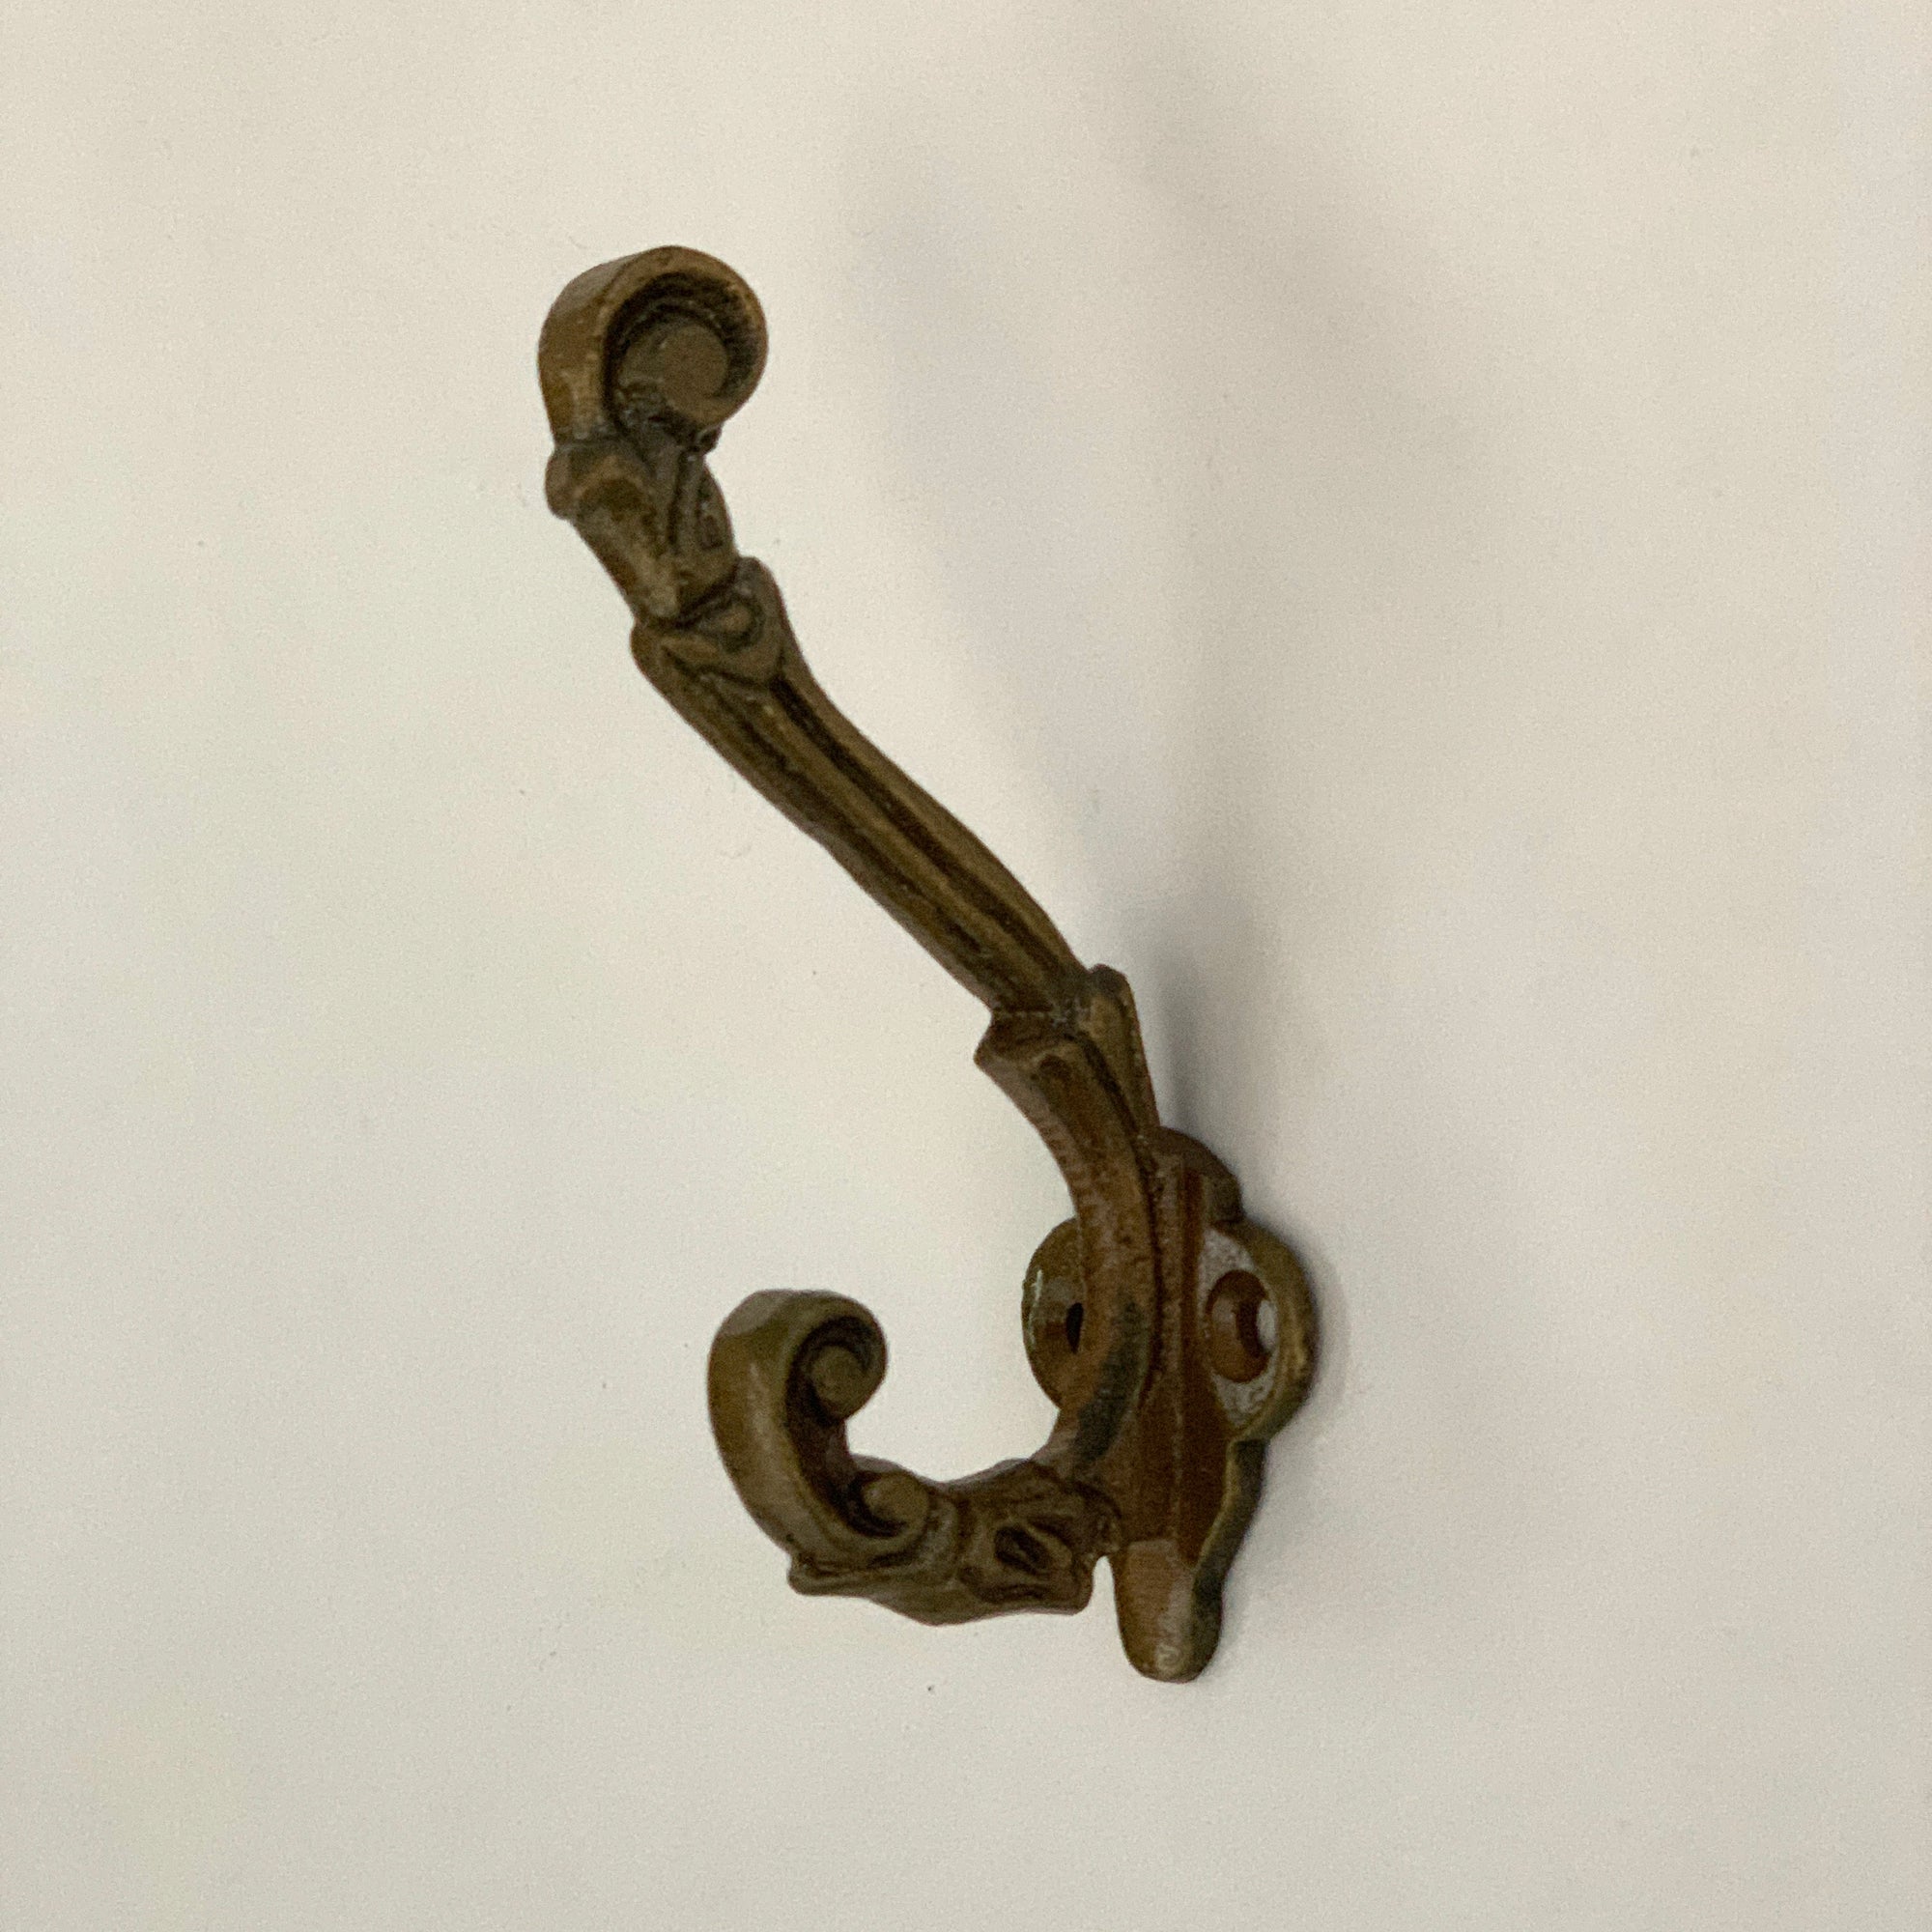 Antique French Decorative Wall Hook - Hooks & Knobs